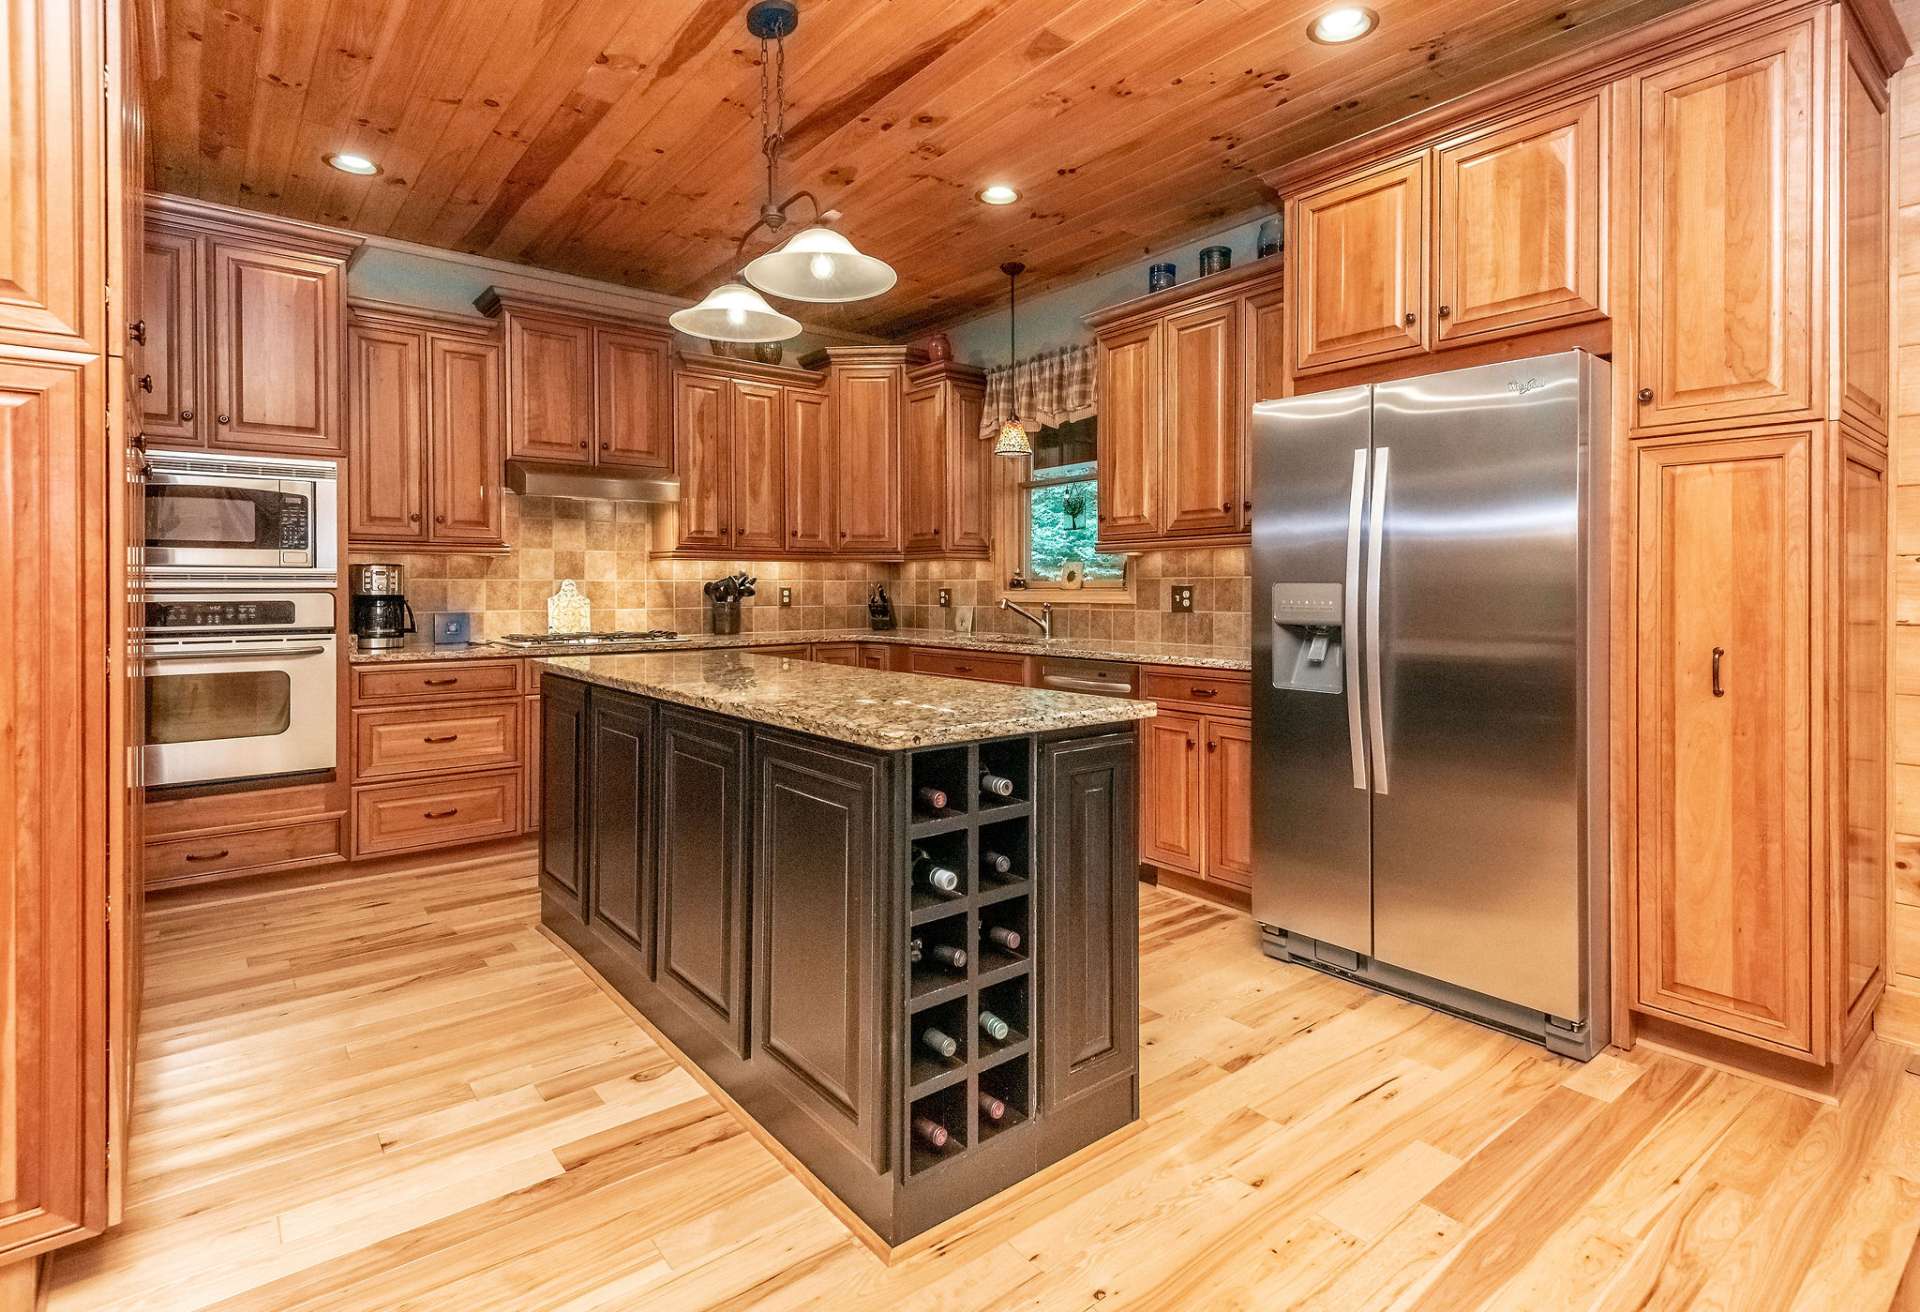 Kitchen features stainless appliances and beautiful wood cabinets with double pantries.